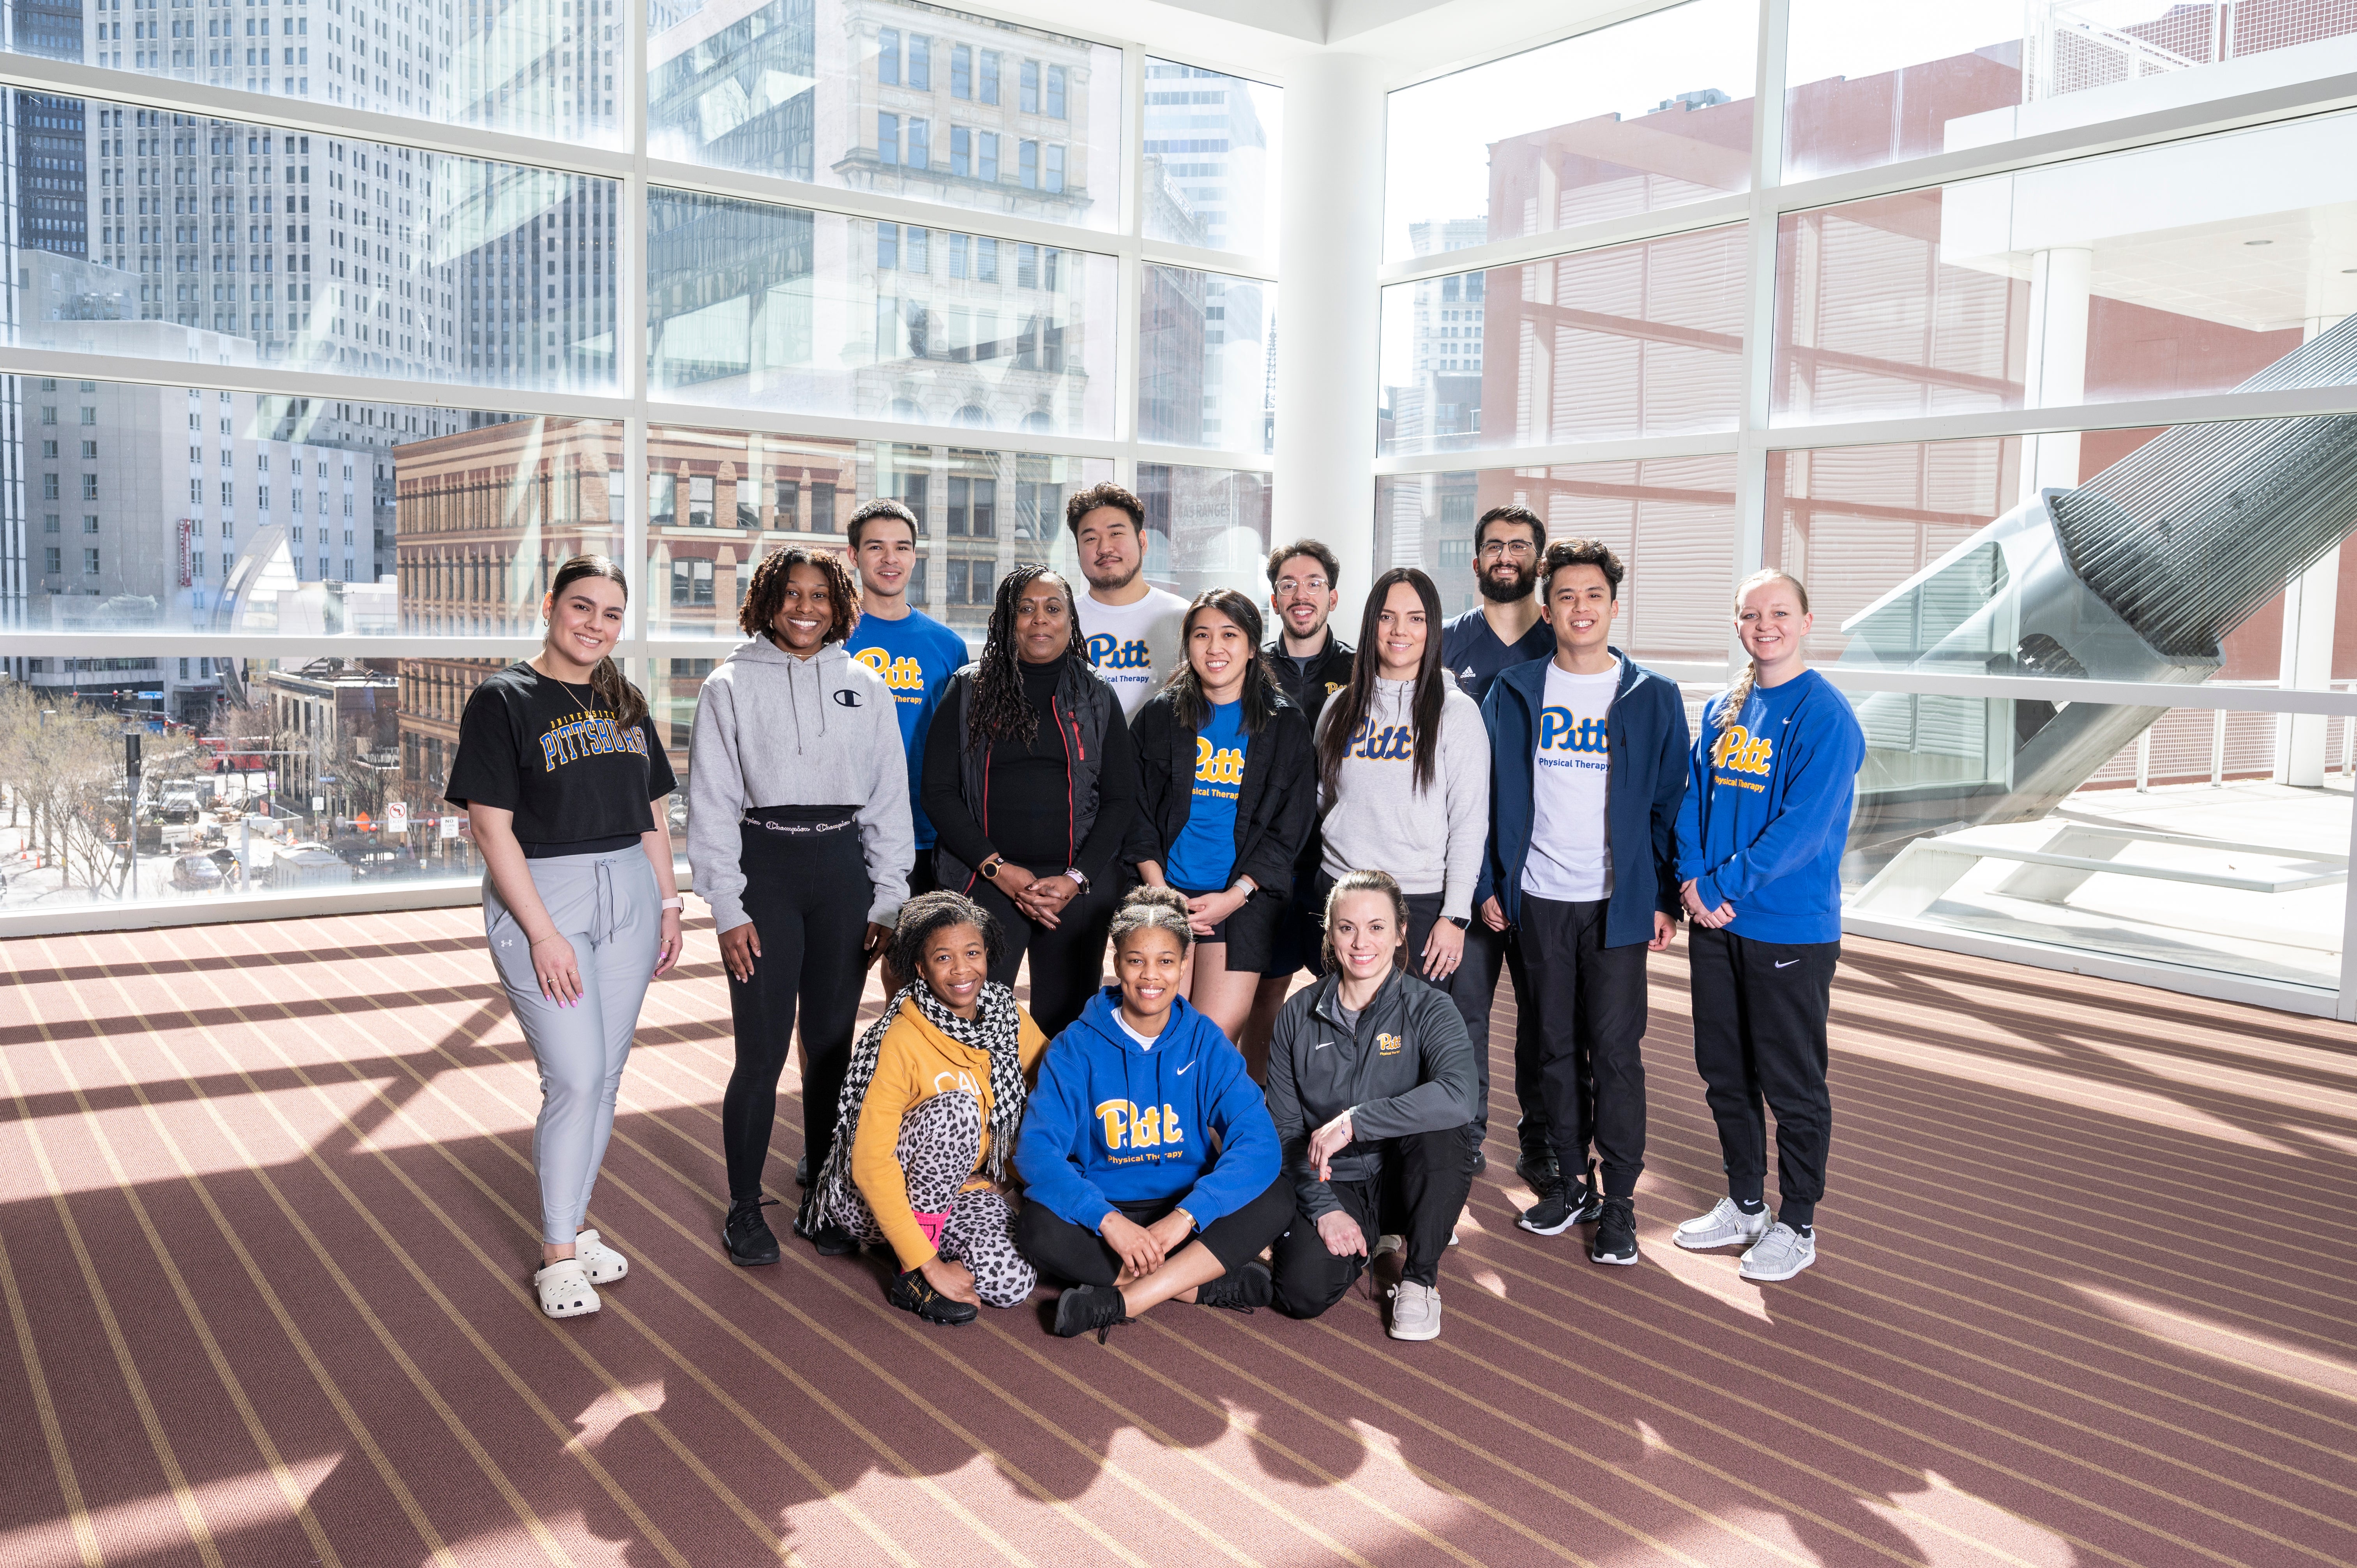 Diverse student body at Pitt Physical Therapy